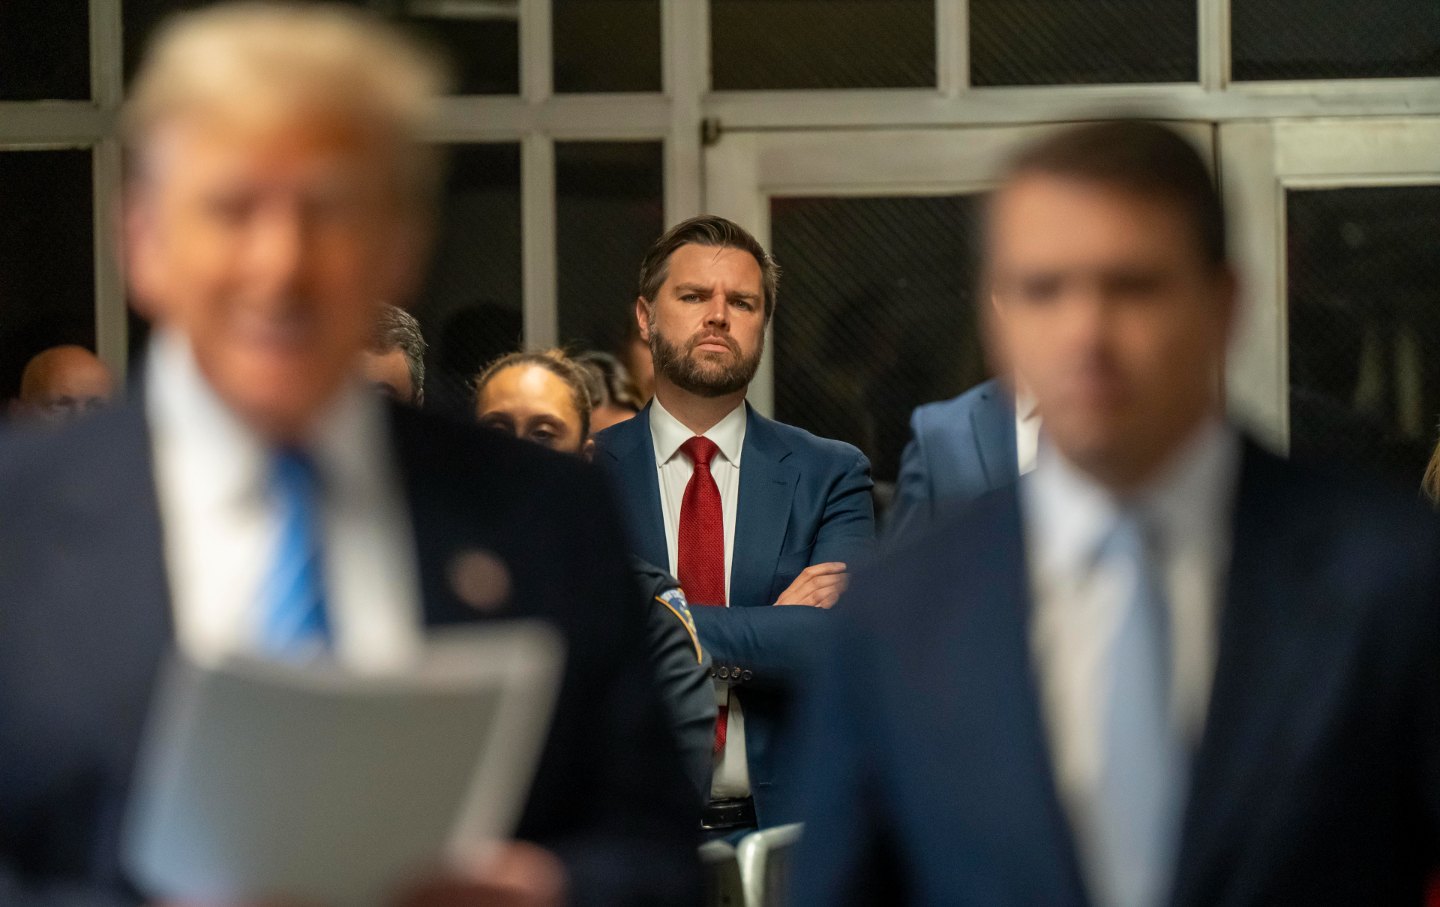 J.D. Vance in the background in focus with Donald Trump in the foreground out of focus.